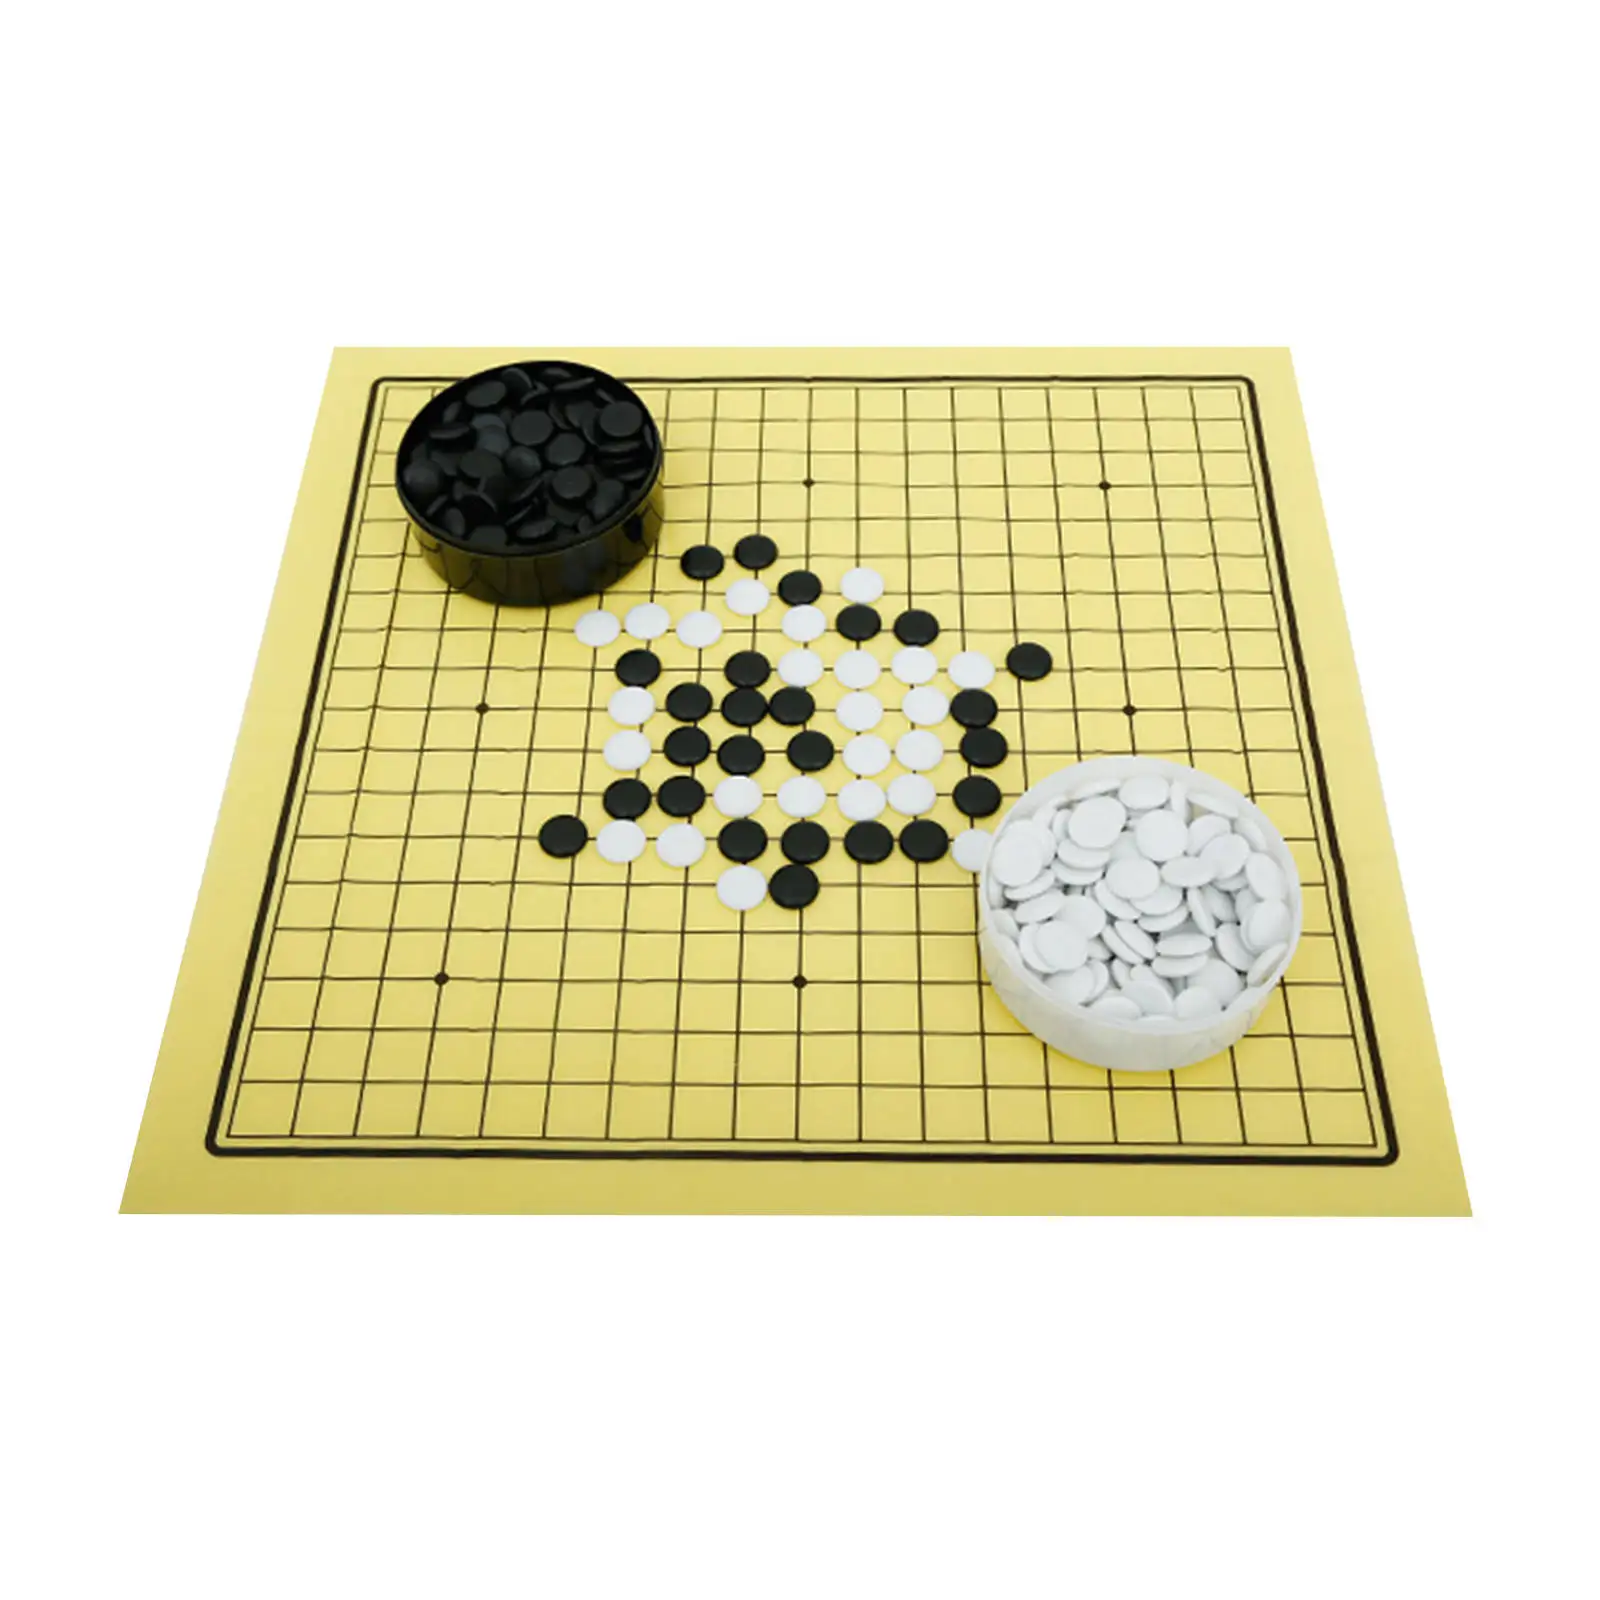 Chinese Go Game Set Baduk/Weiqi Bakelite Intellectual Game Chess Pieces Go Stones Gift Foldable Go Board Game for Beginner Kids